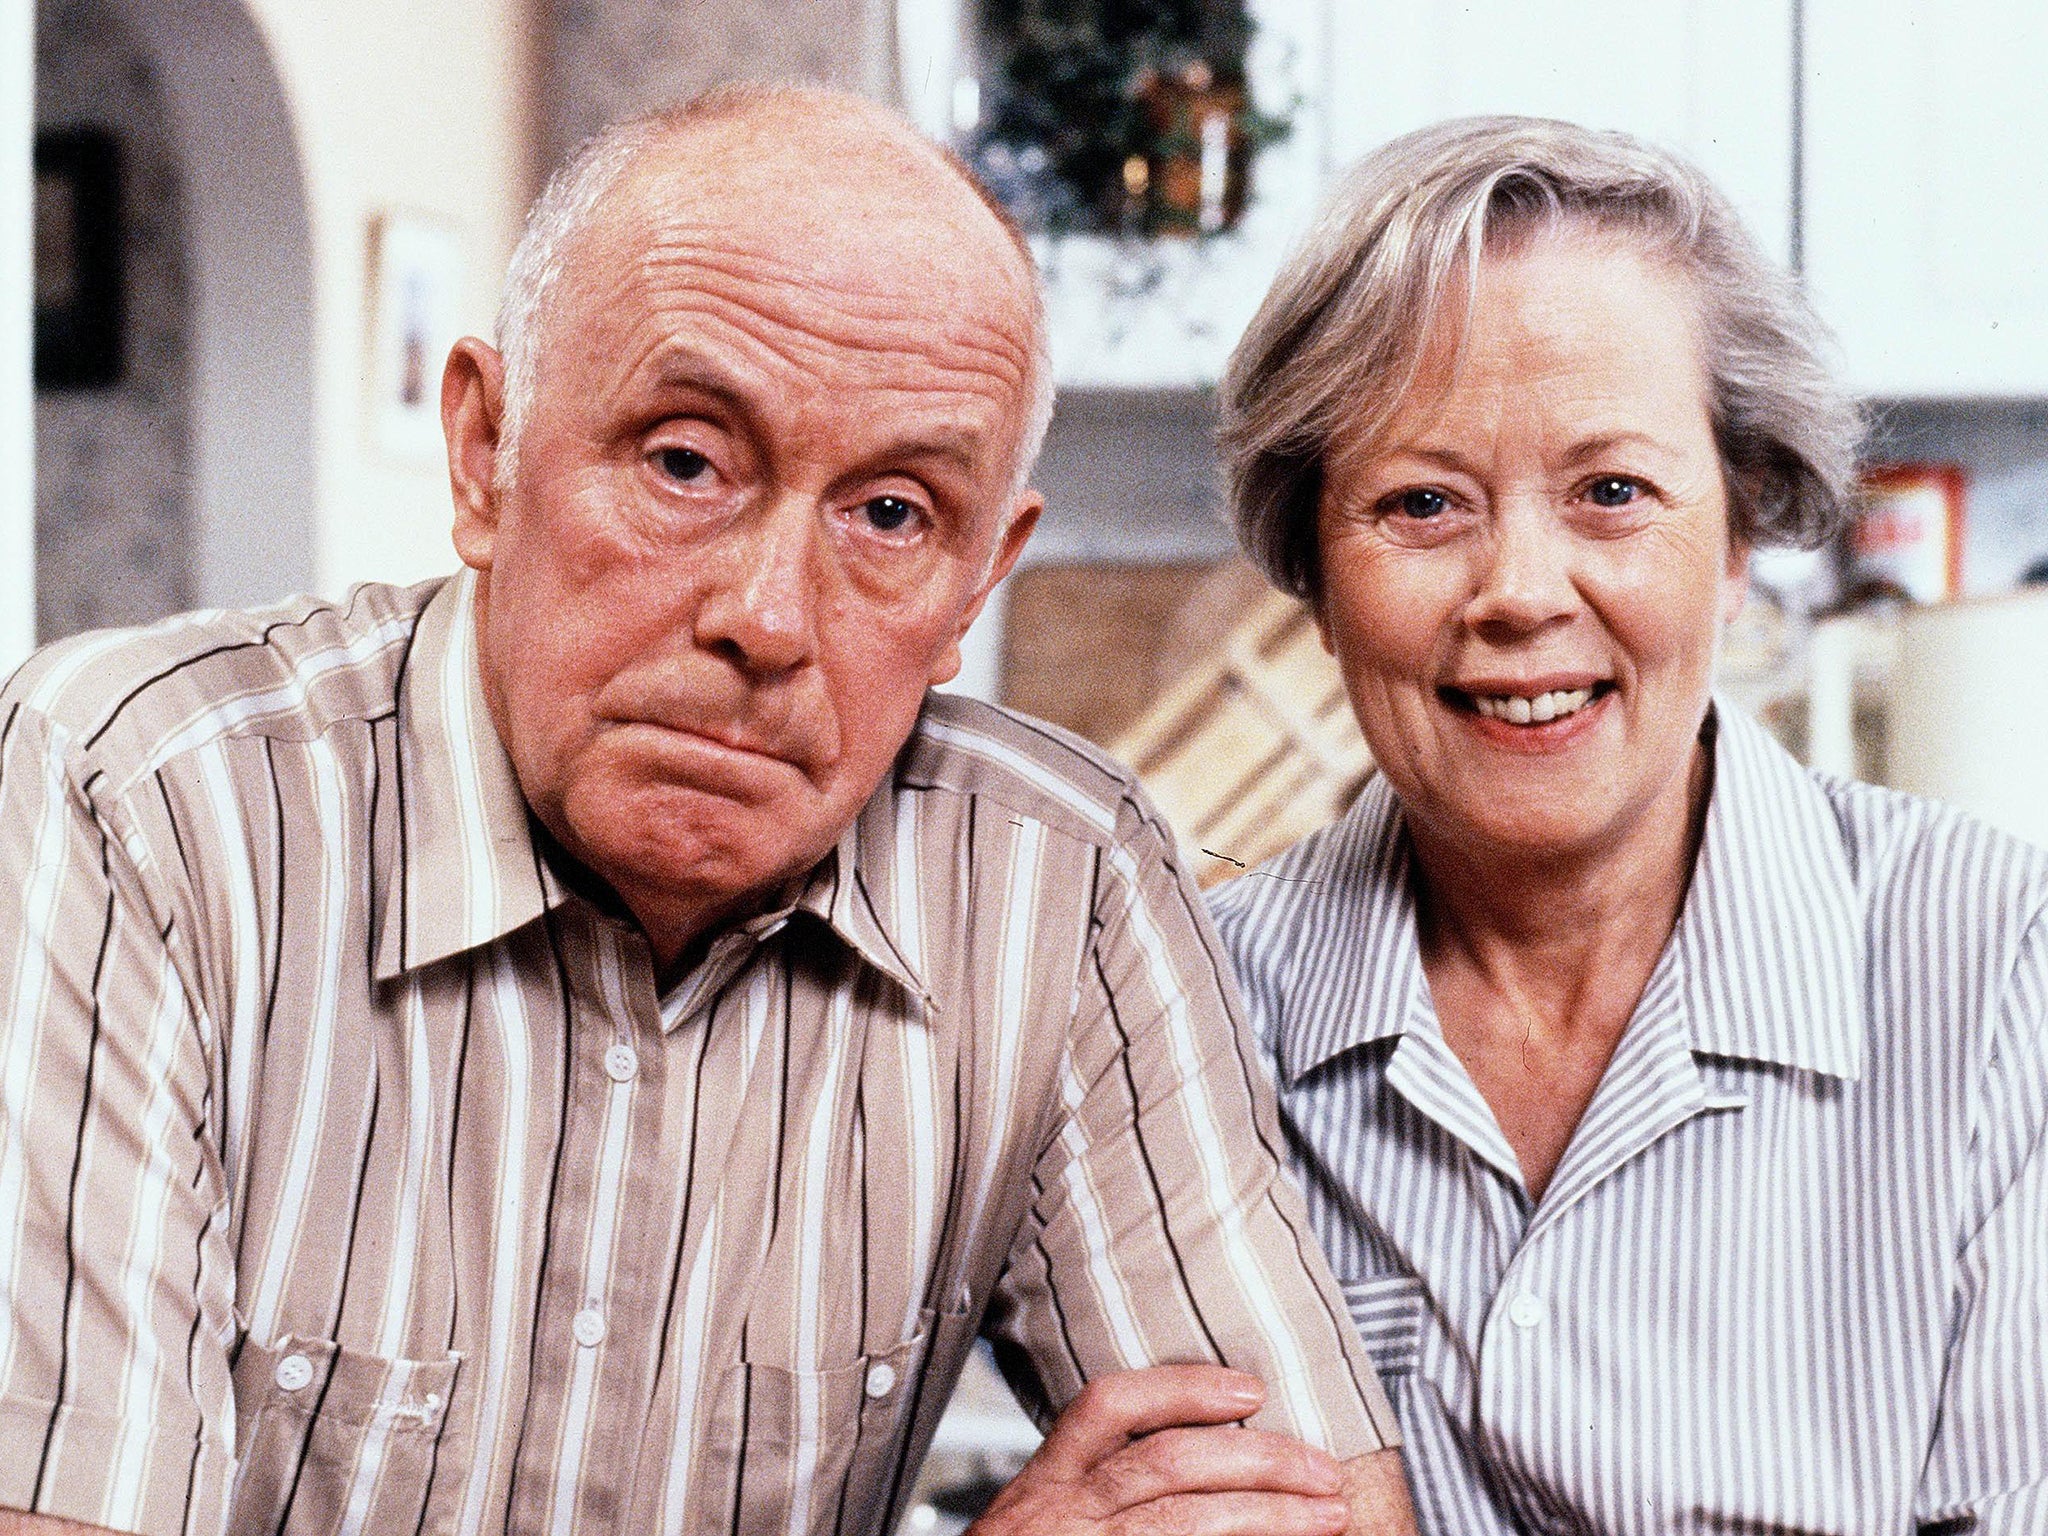 Victor Meldrew, Richard Wilson's character in the British sitcom 'One Foot in the Grave', coined the much-loved phrase